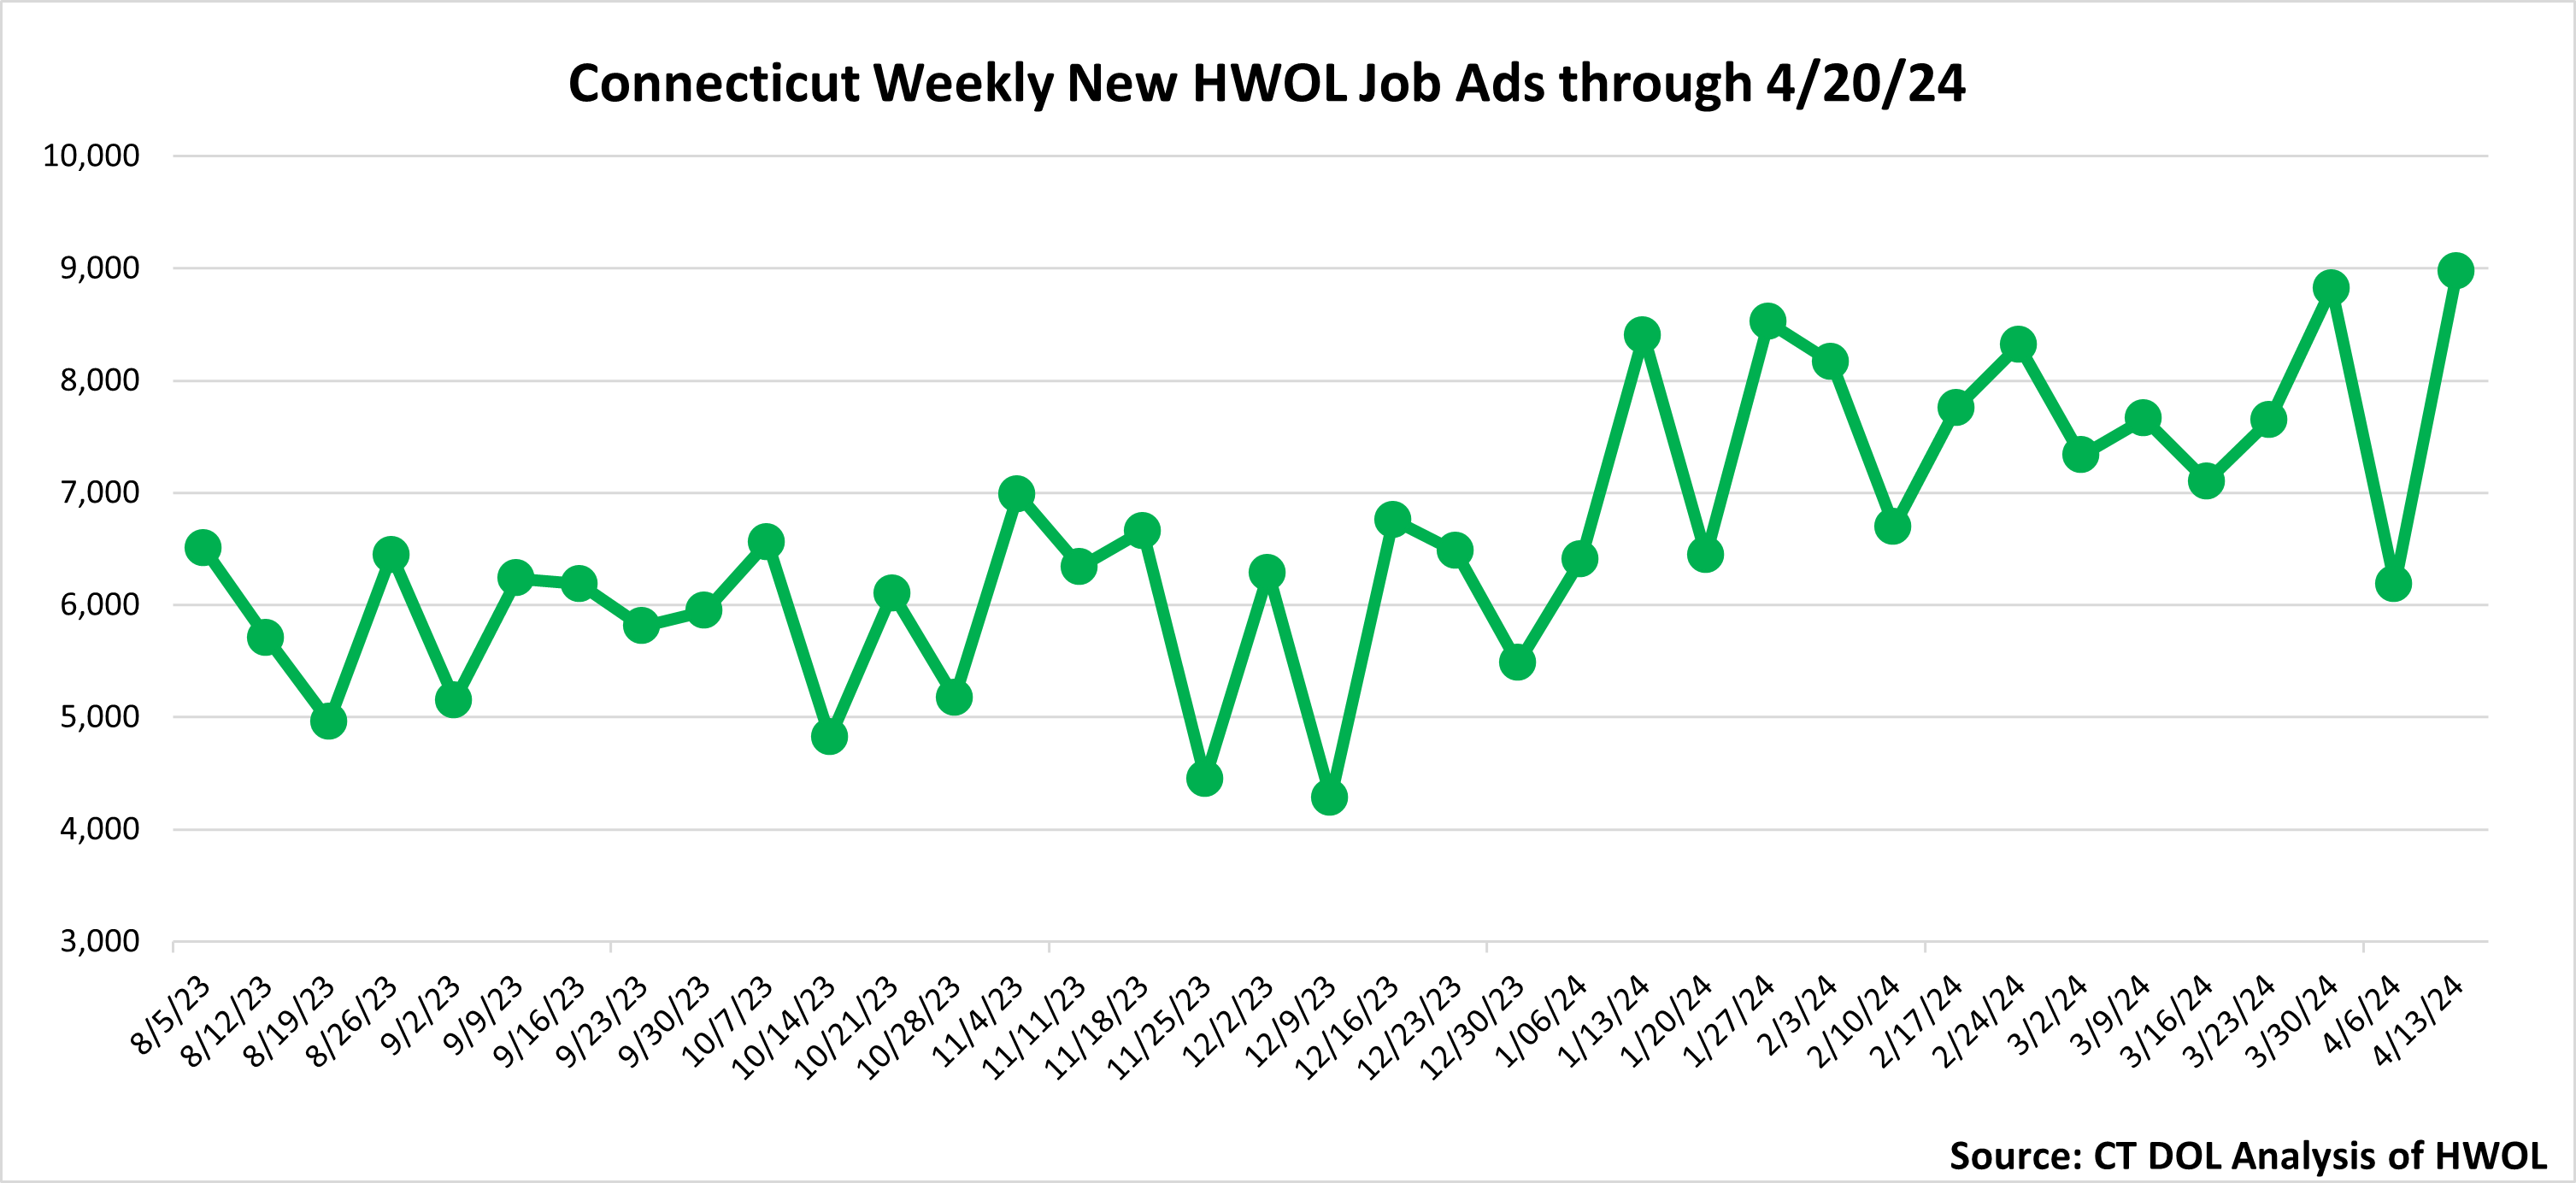 Connecticut Weekly Statewide New HWOL Job Ads through April 13th 2024